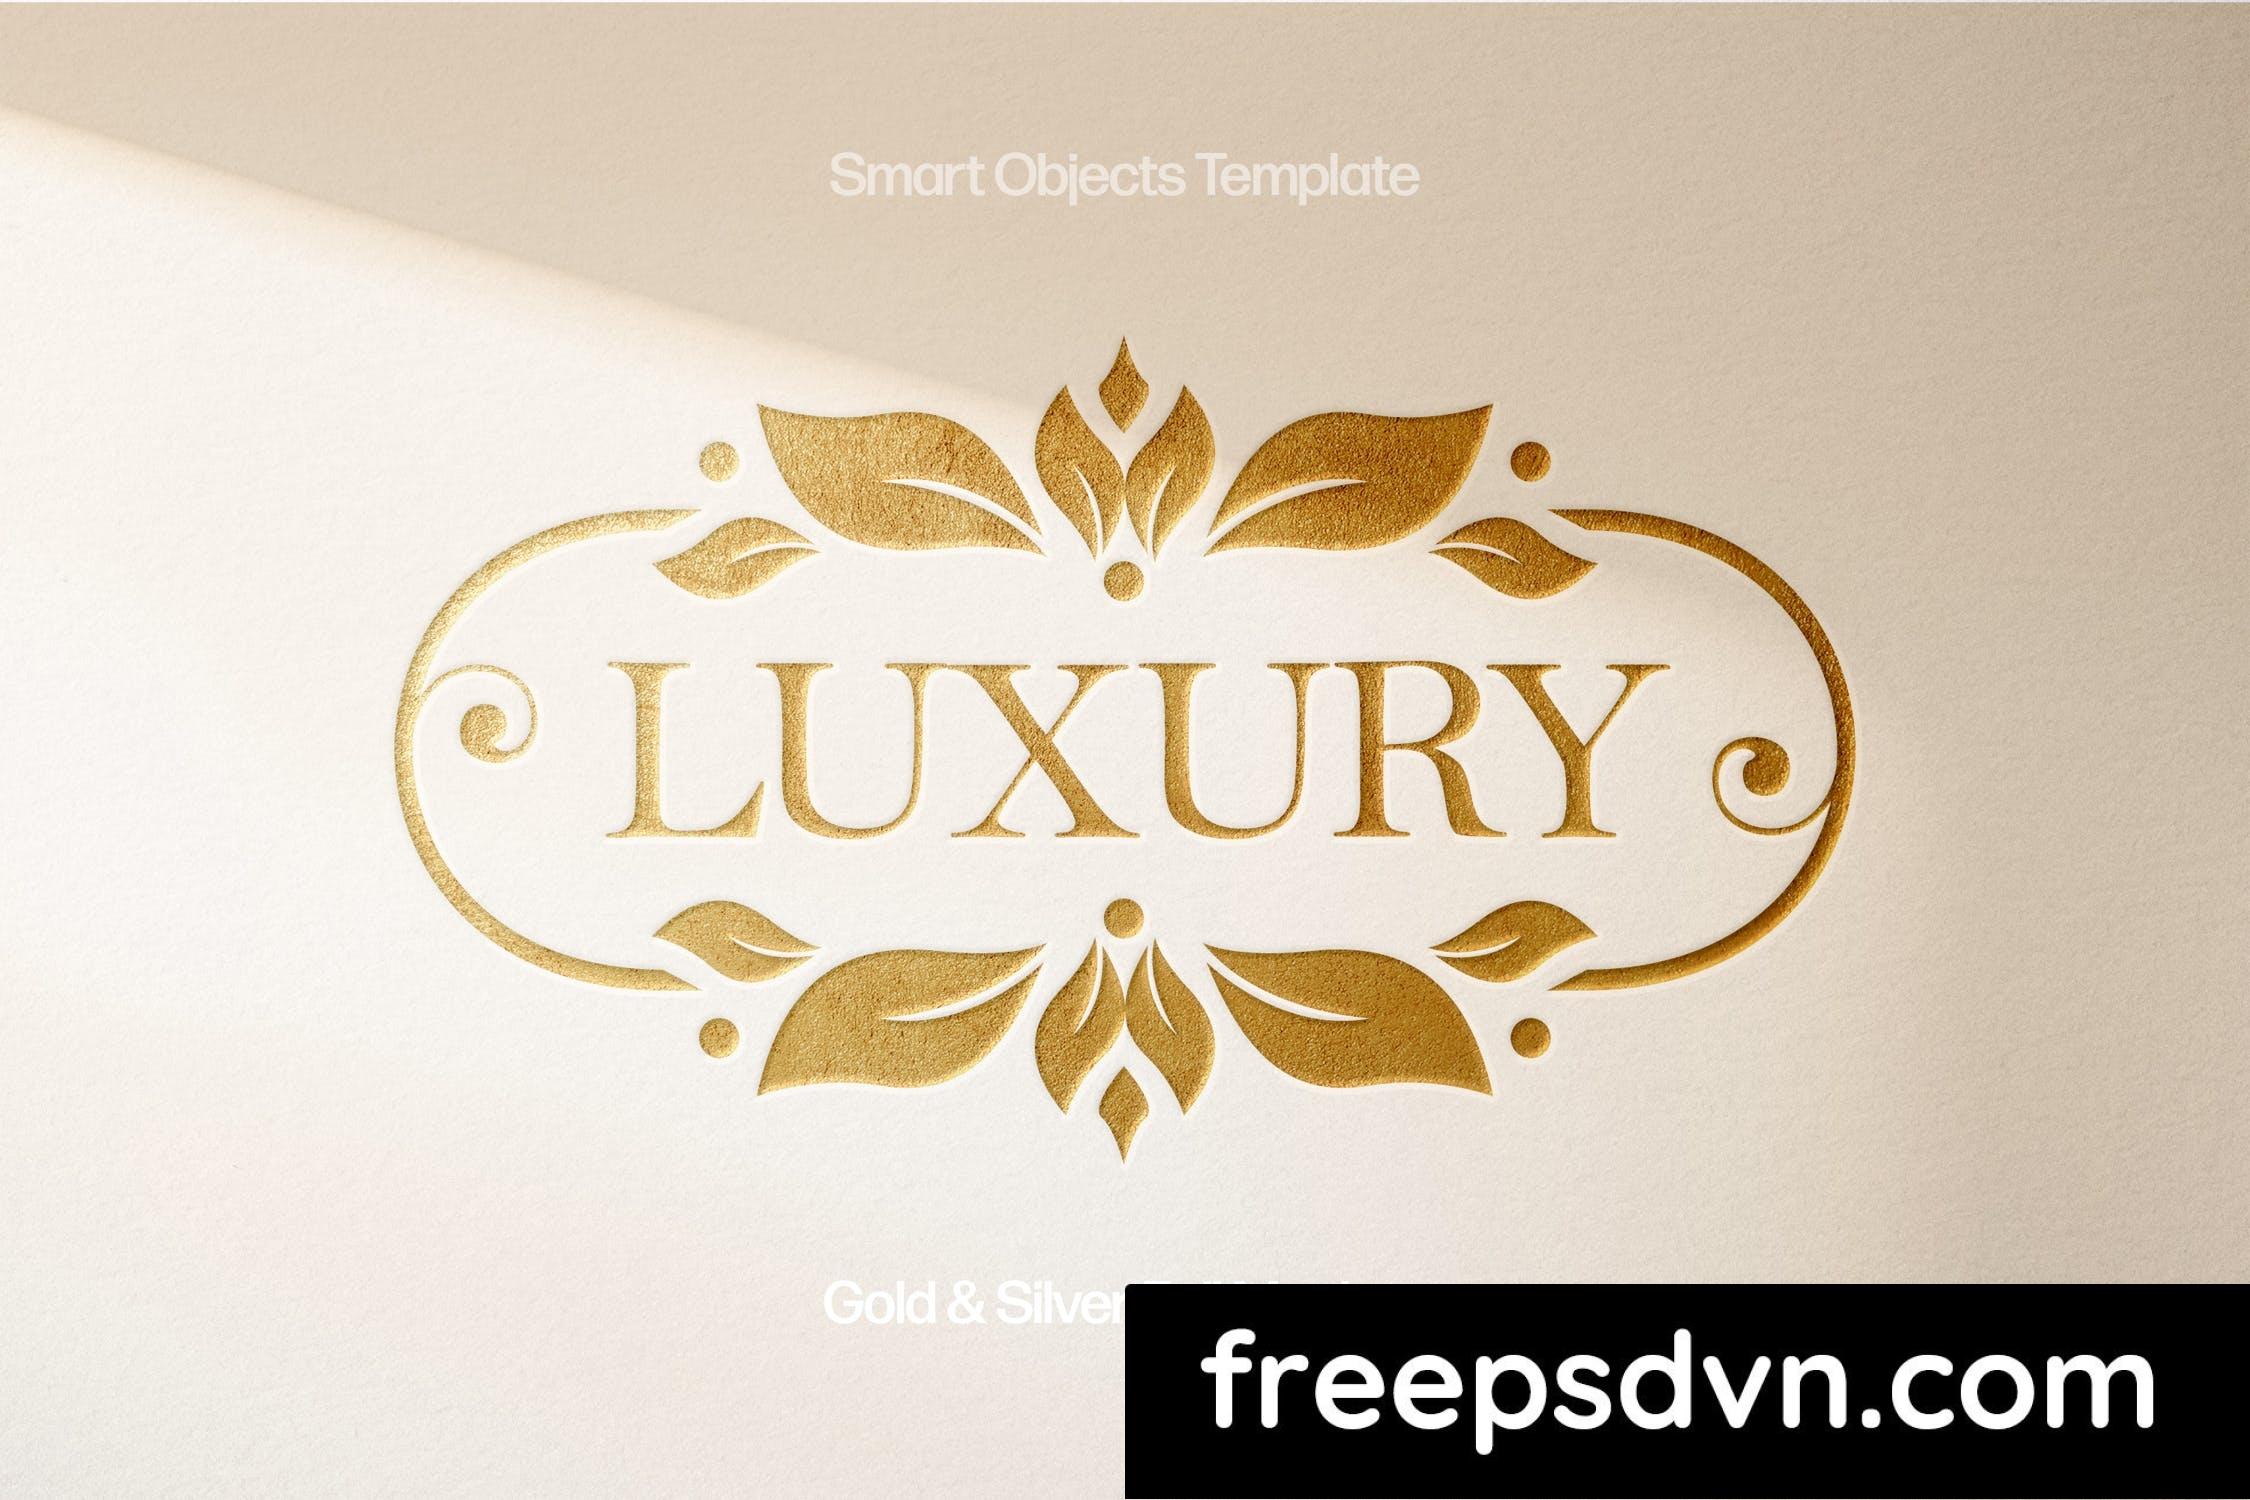 gold silver foil mockups with shadow overlay 3ar3wu4 0